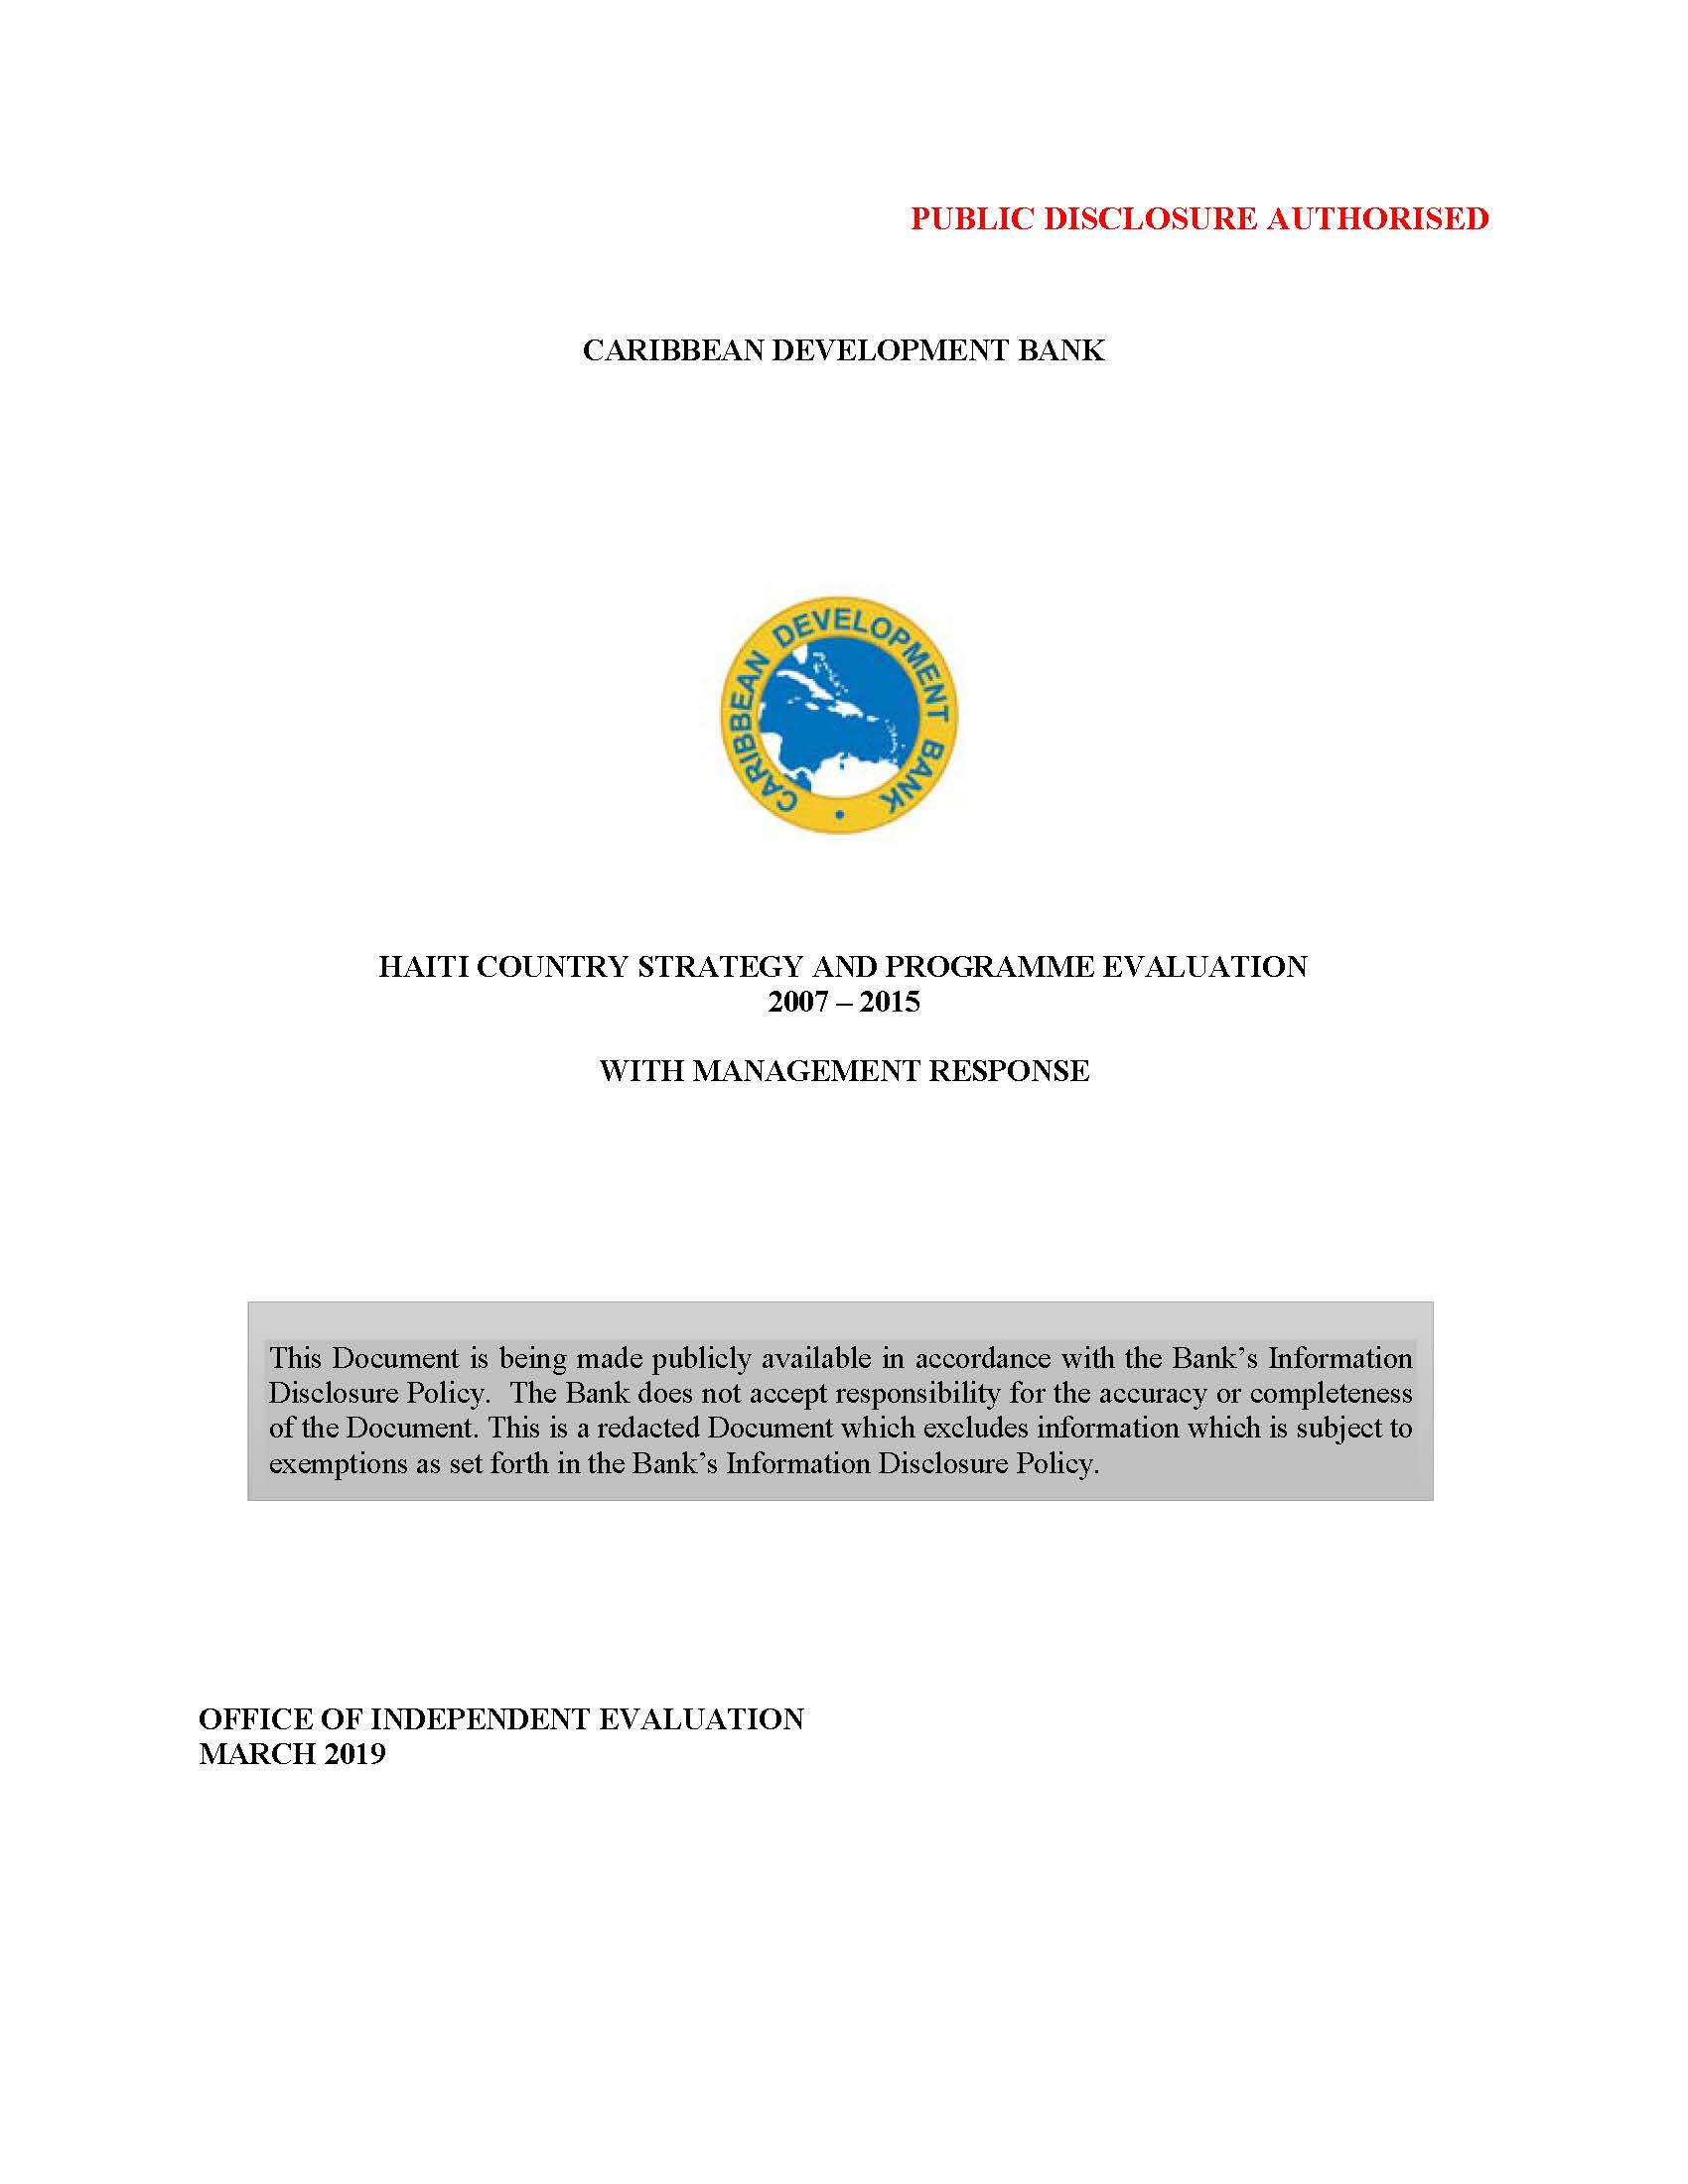 text-based cover featuring document title